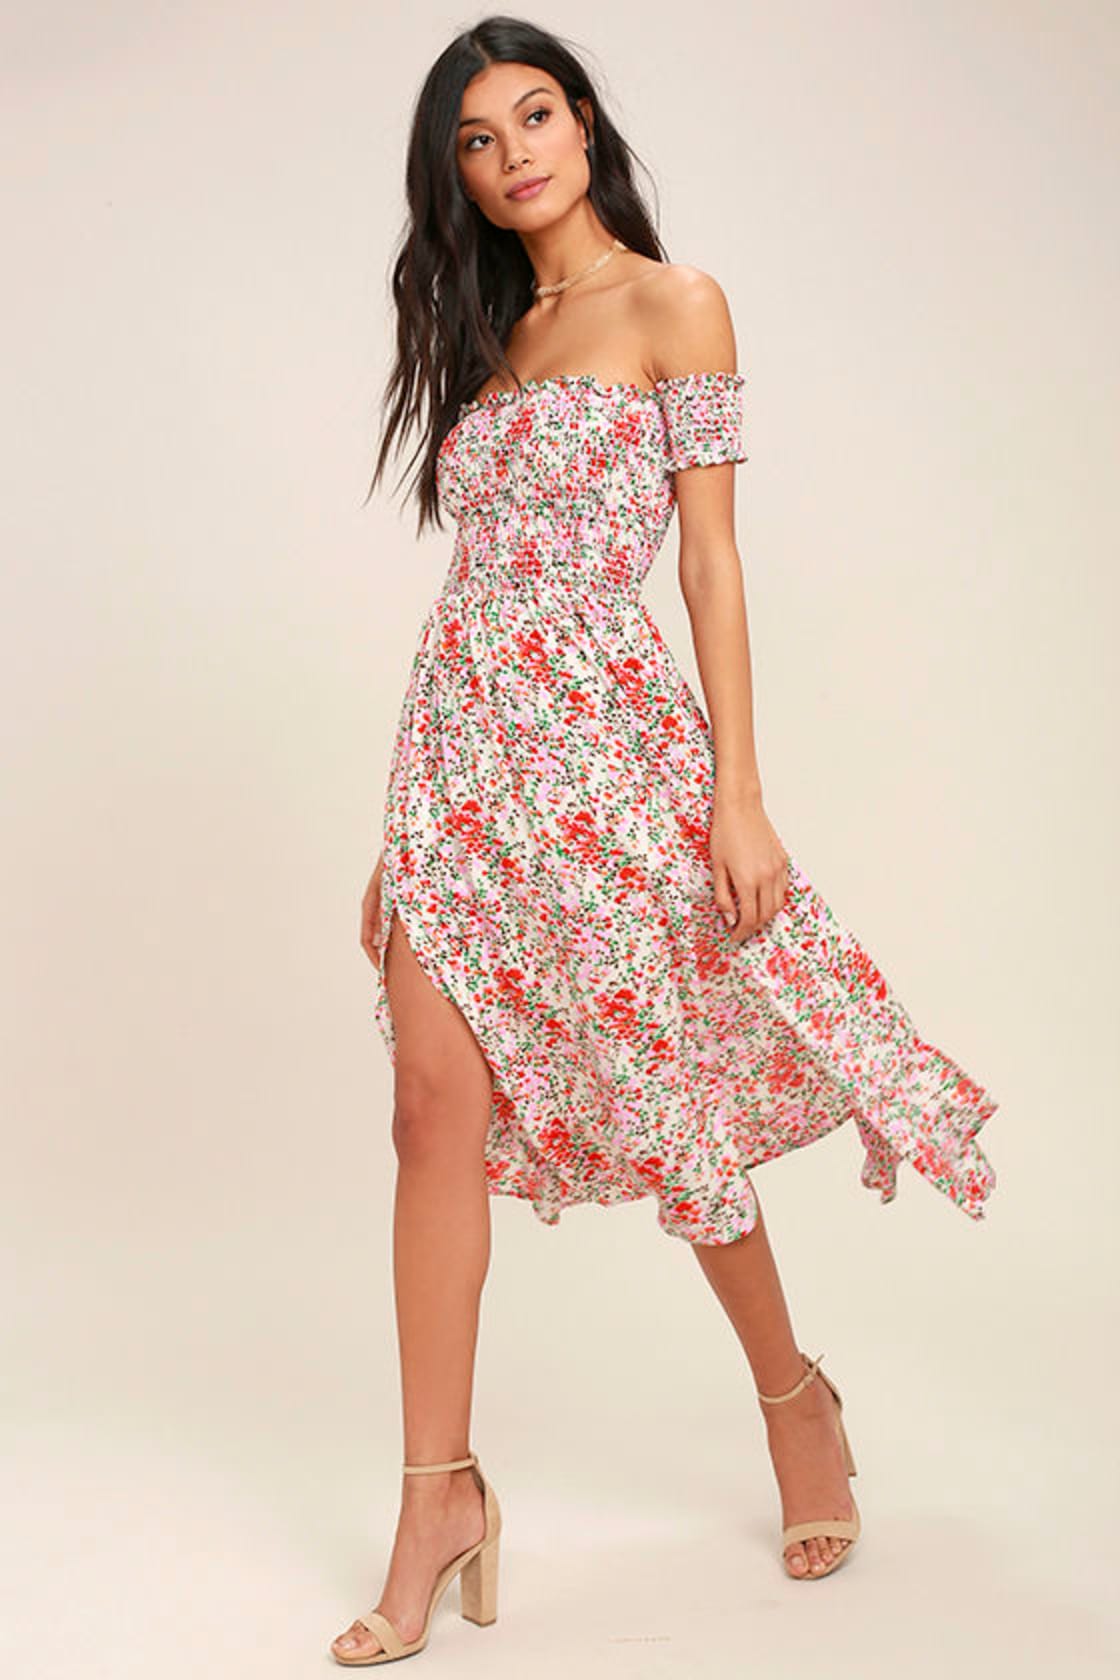 Cute Pink Floral Off Shoulder Dress for Bridal Shower, Bachelorette Party, and Summer Outfits